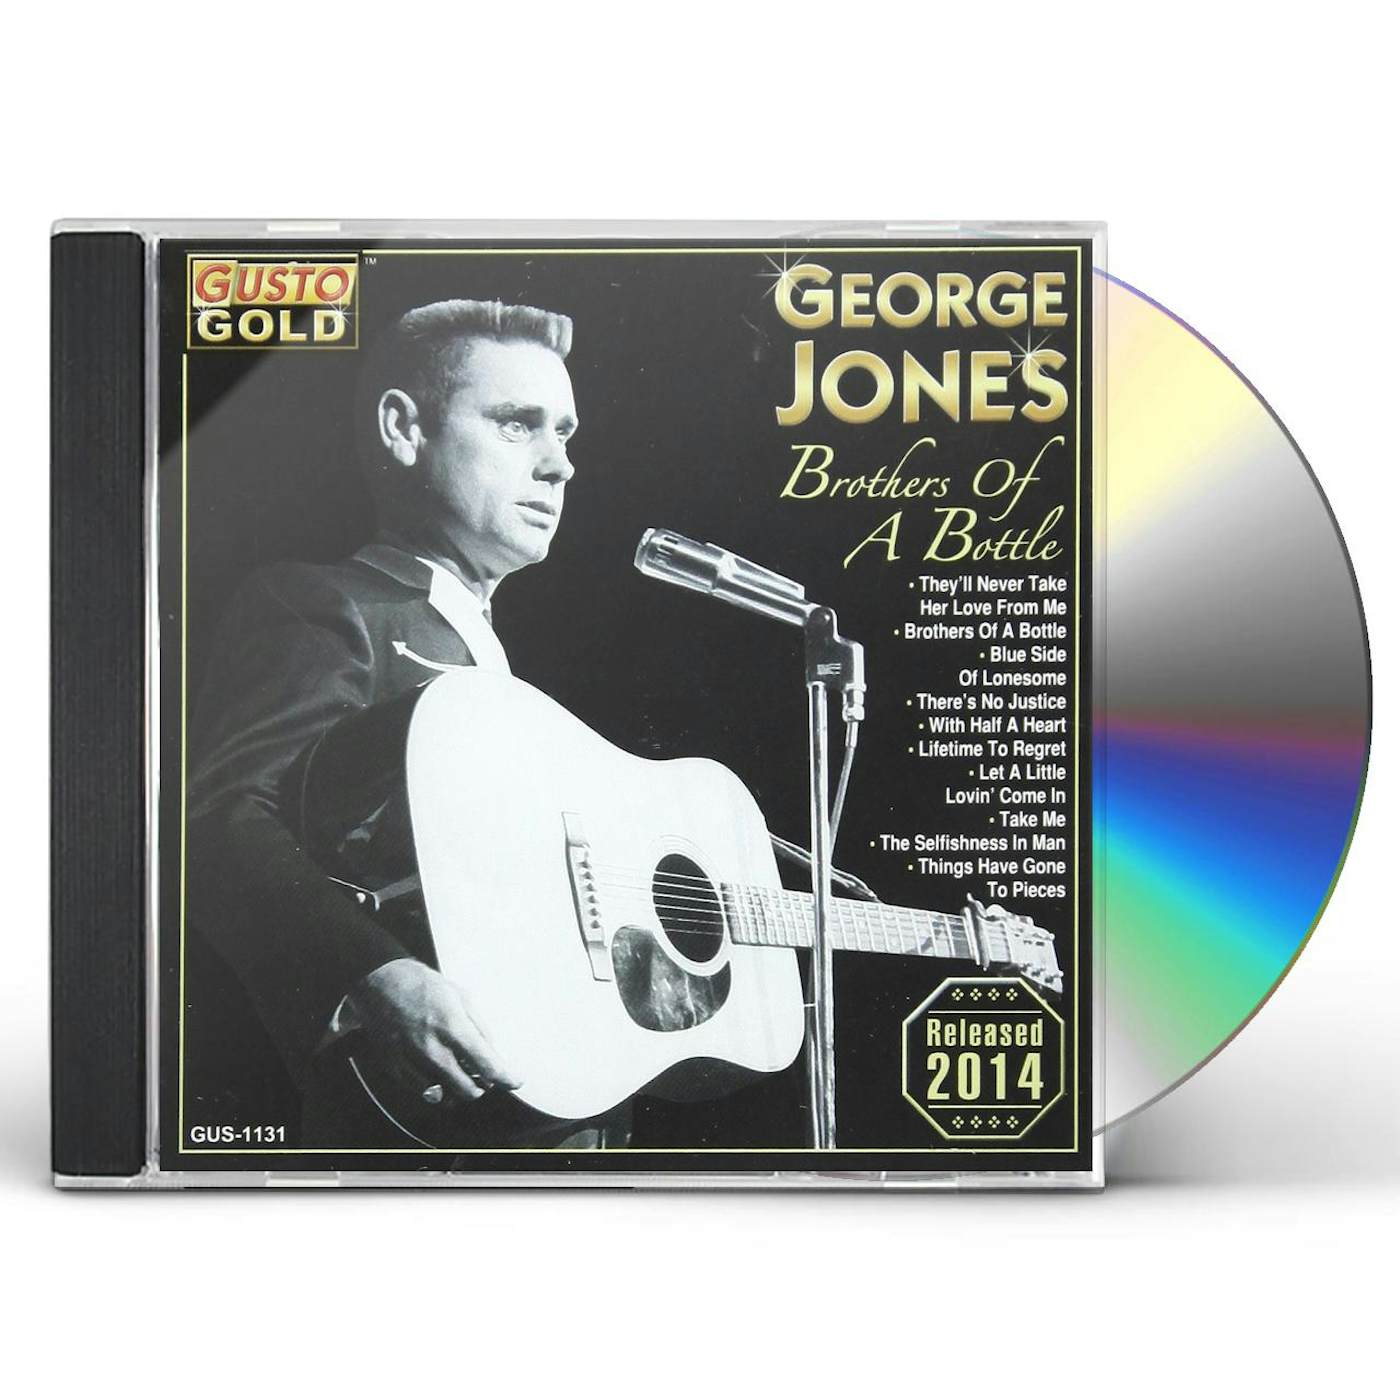 George Jones BROTHERS OF A BOTTLE CD